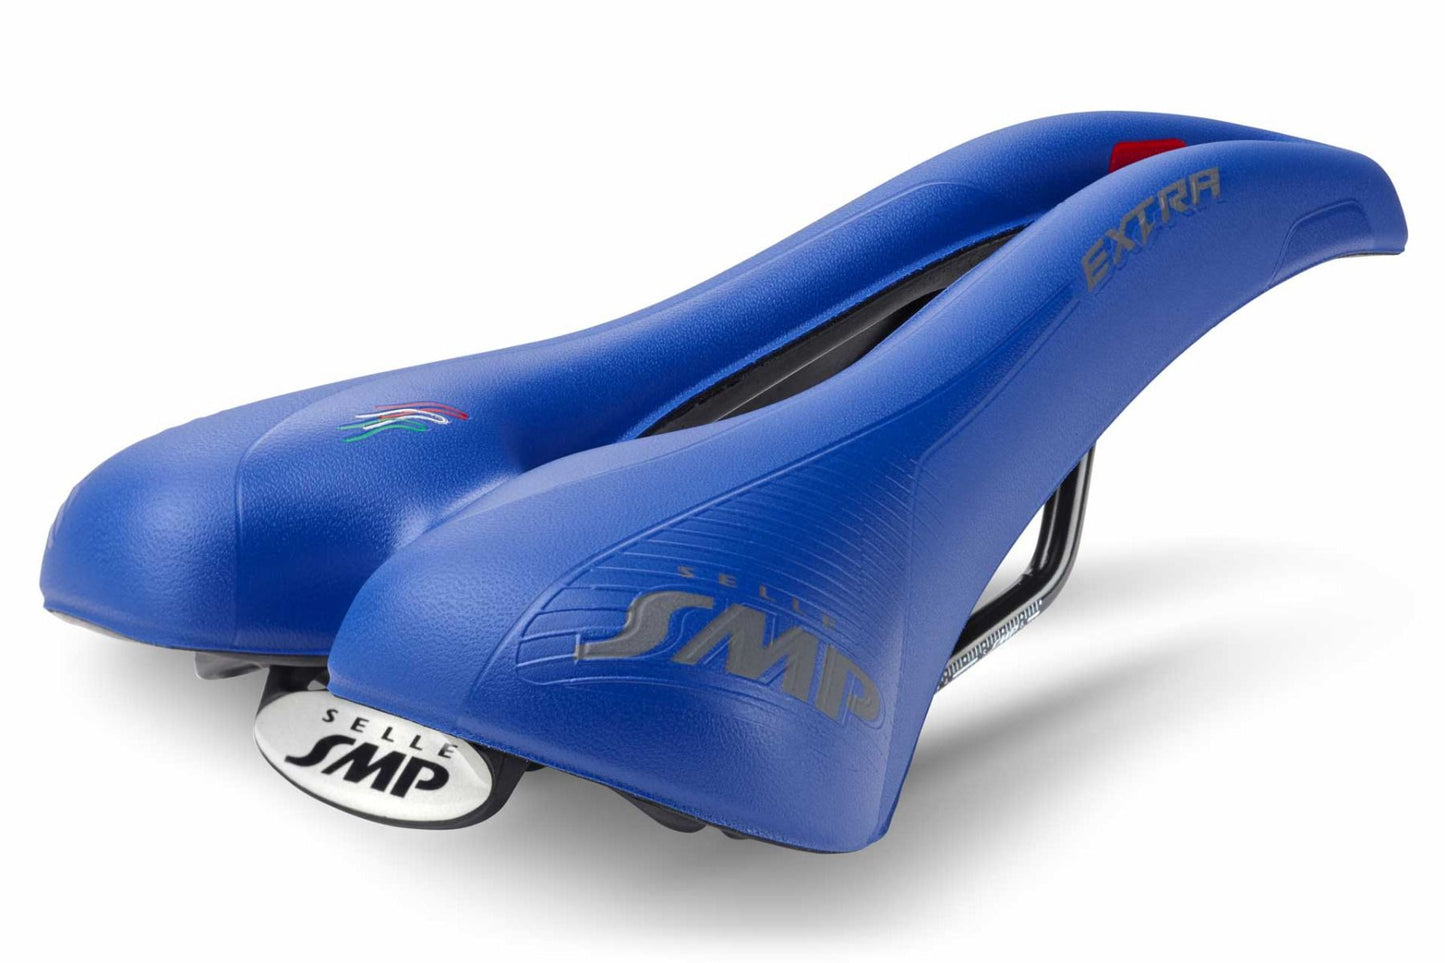 Selle SMP Extra Saddle (Blue)